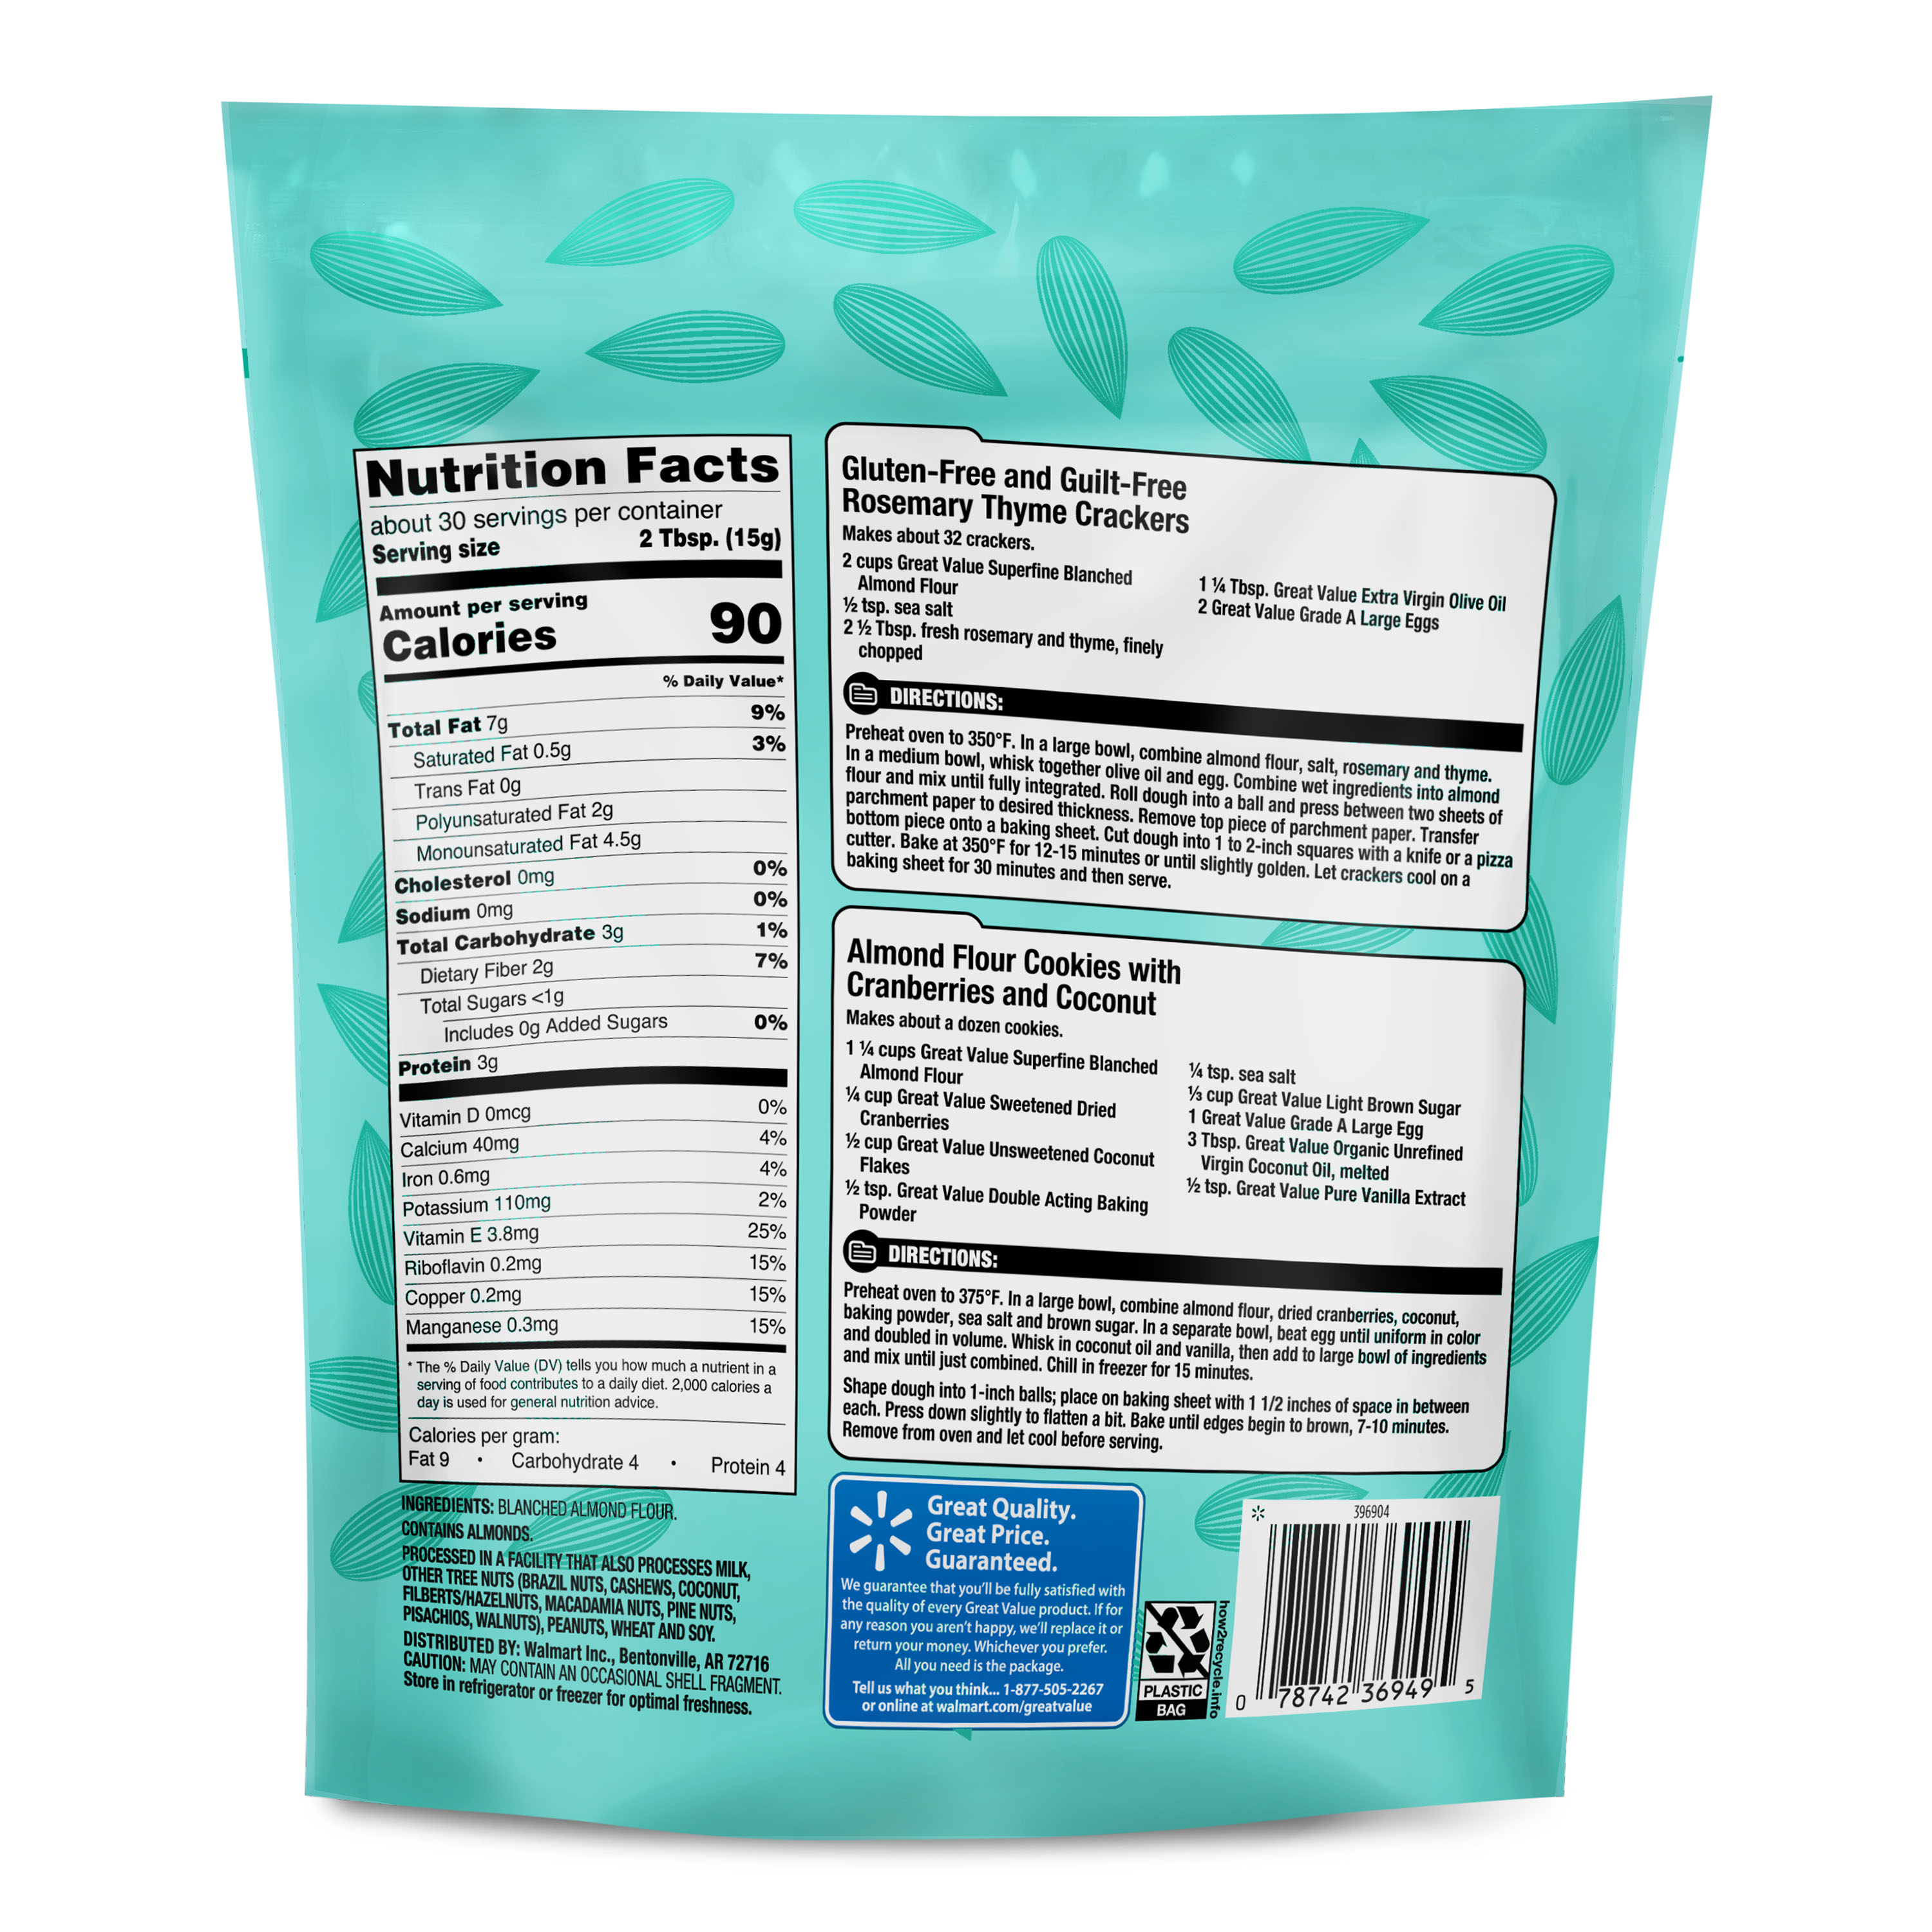 Great Value Superfine Blanched Almond Flour, 2 lb - image 5 of 7